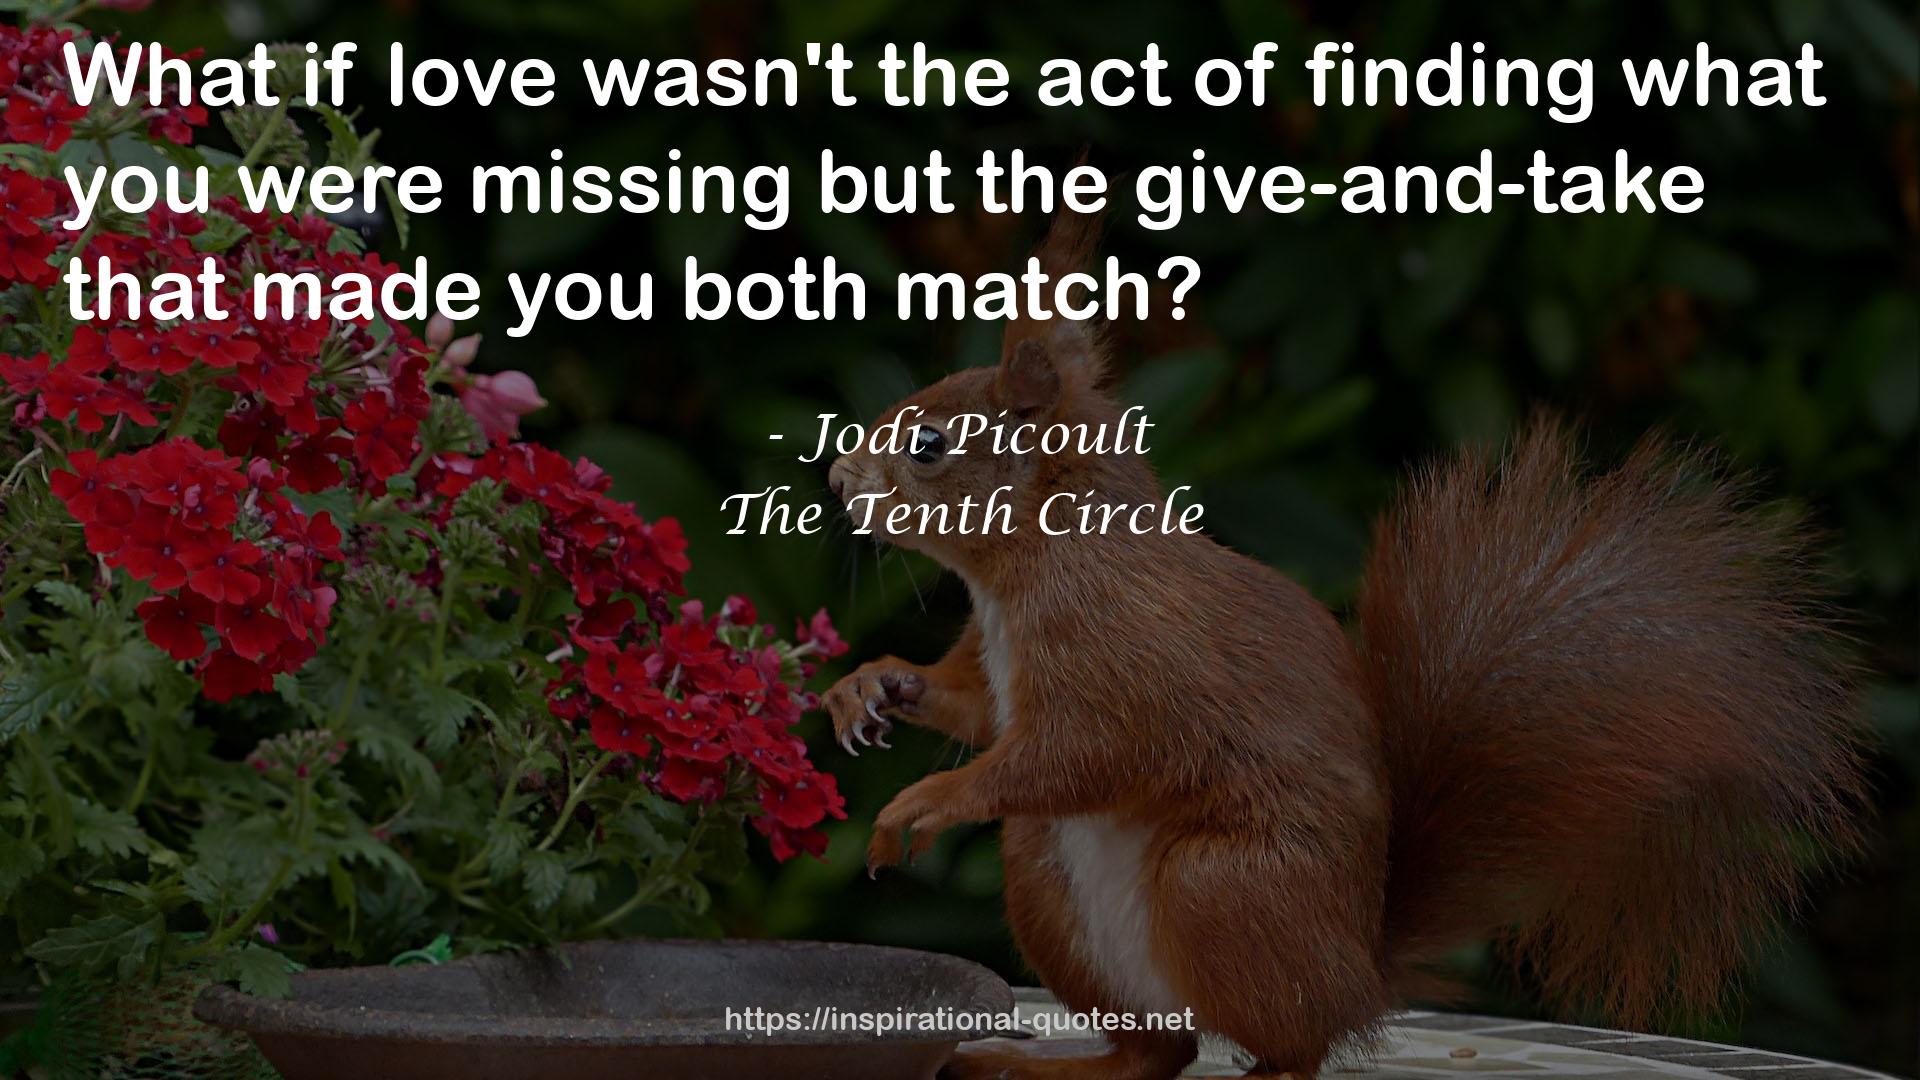 The Tenth Circle QUOTES